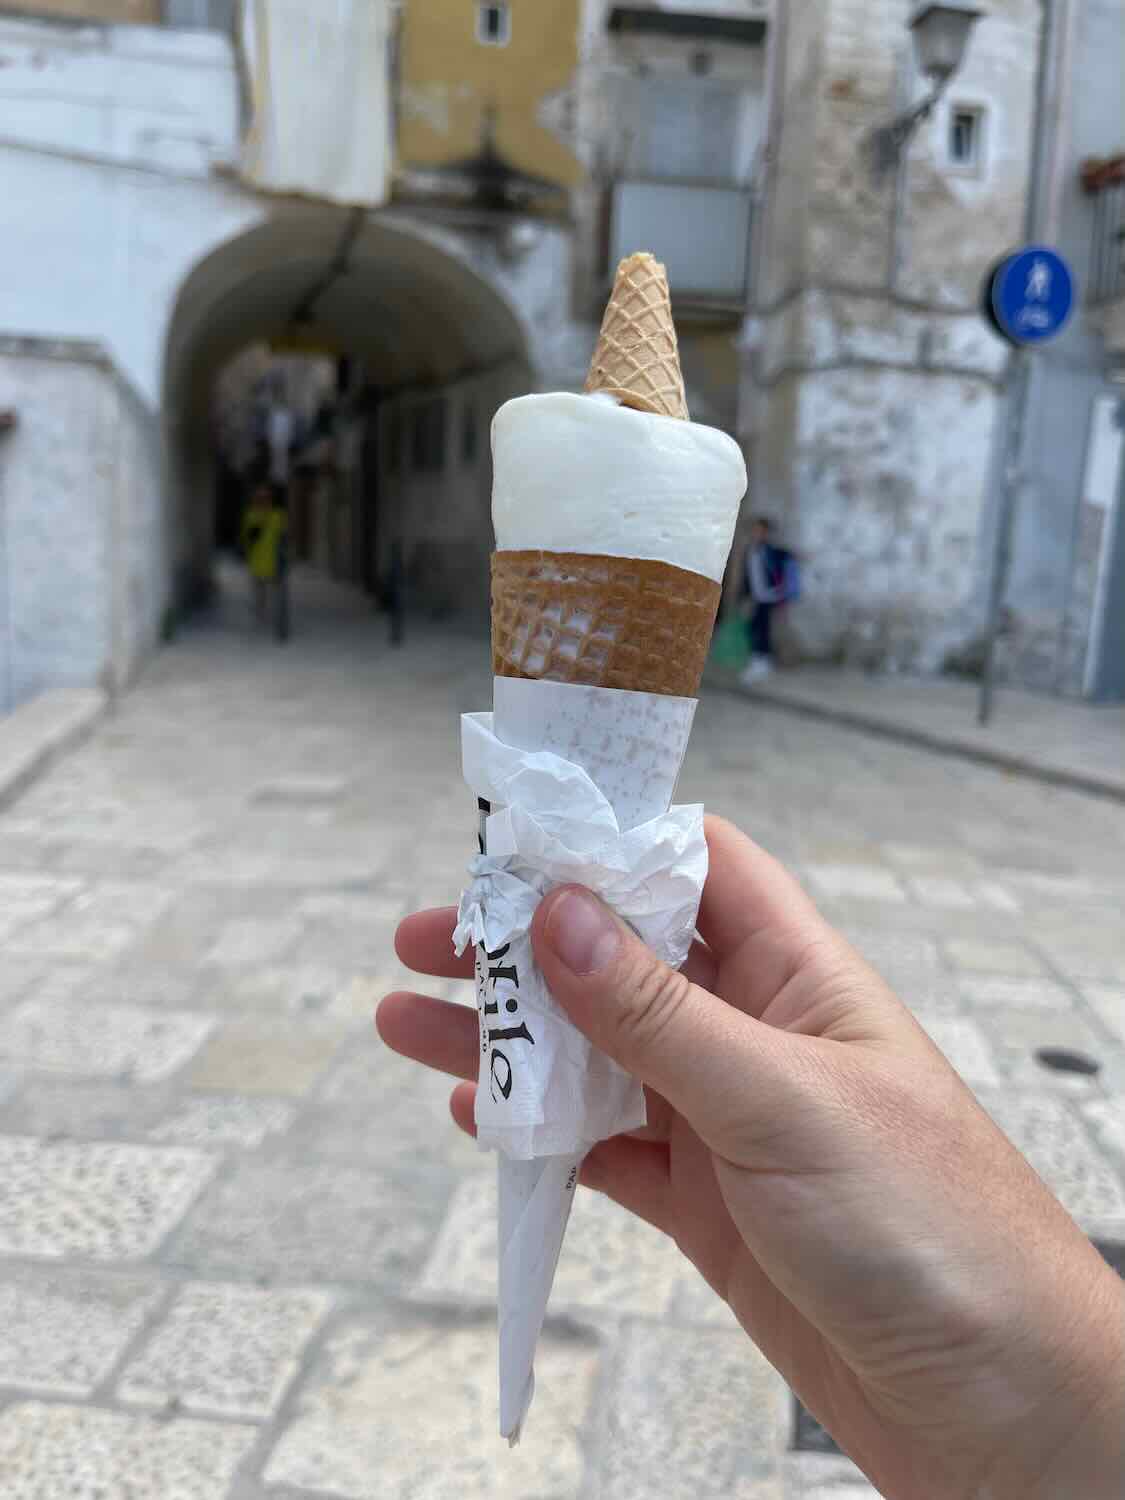 A close-up photo of a hand holding a gelato cone with a scoop of white gelato in Bari, Italy. The background features a narrow street with historic buildings and an archway, providing a charming and picturesque setting.